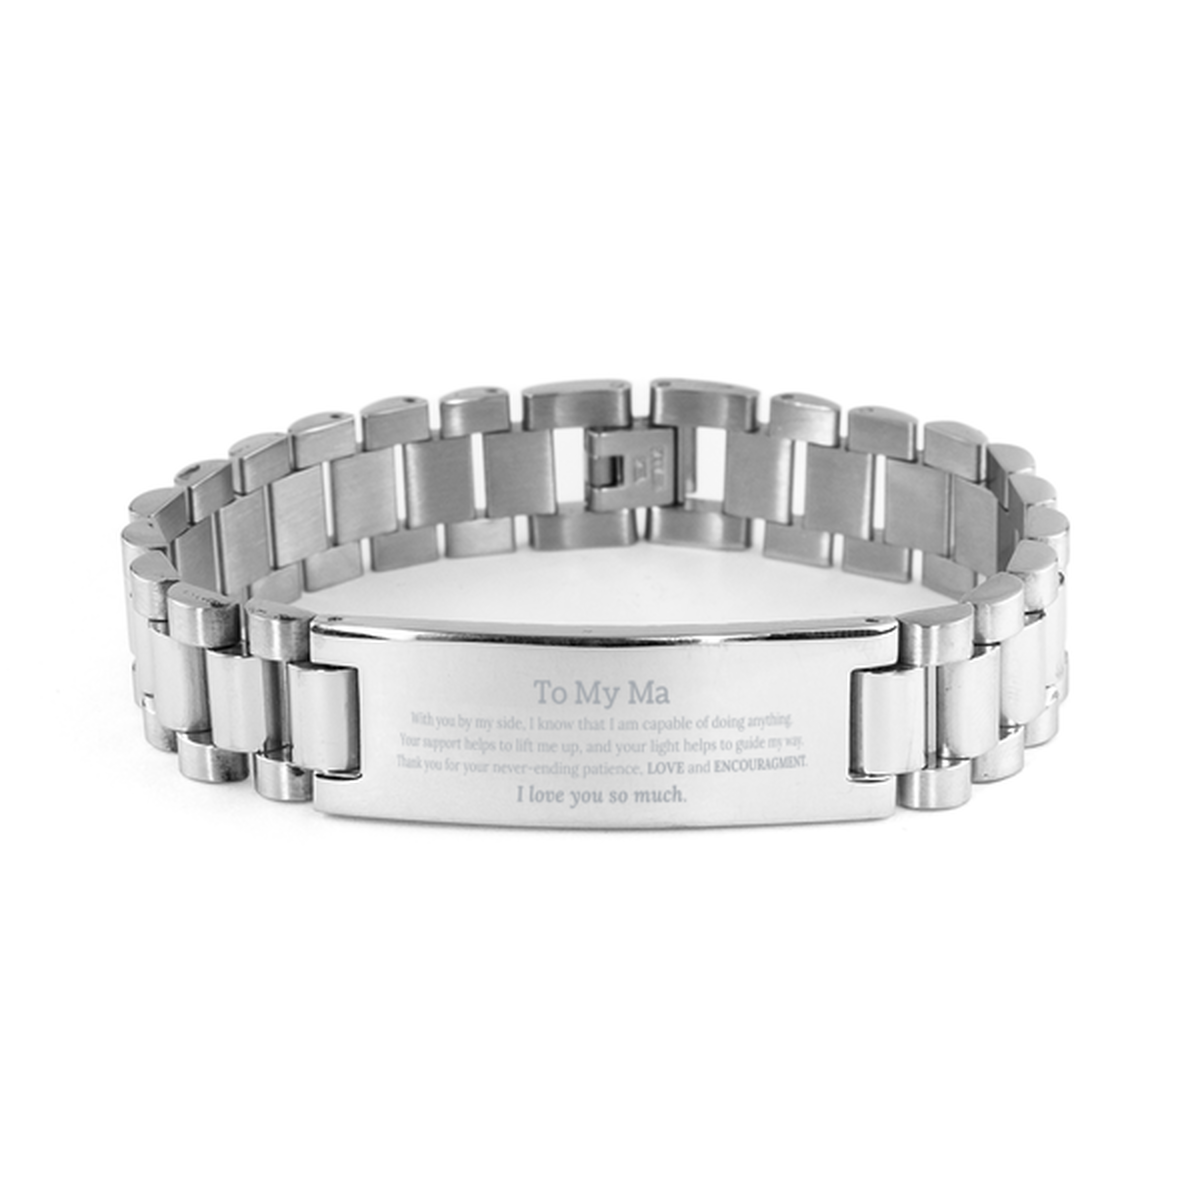 Appreciation Ma Ladder Stainless Steel Bracelet Gifts, To My Ma Birthday Christmas Wedding Keepsake Gifts for Ma With you by my side, I know that I am capable of doing anything. I love you so much